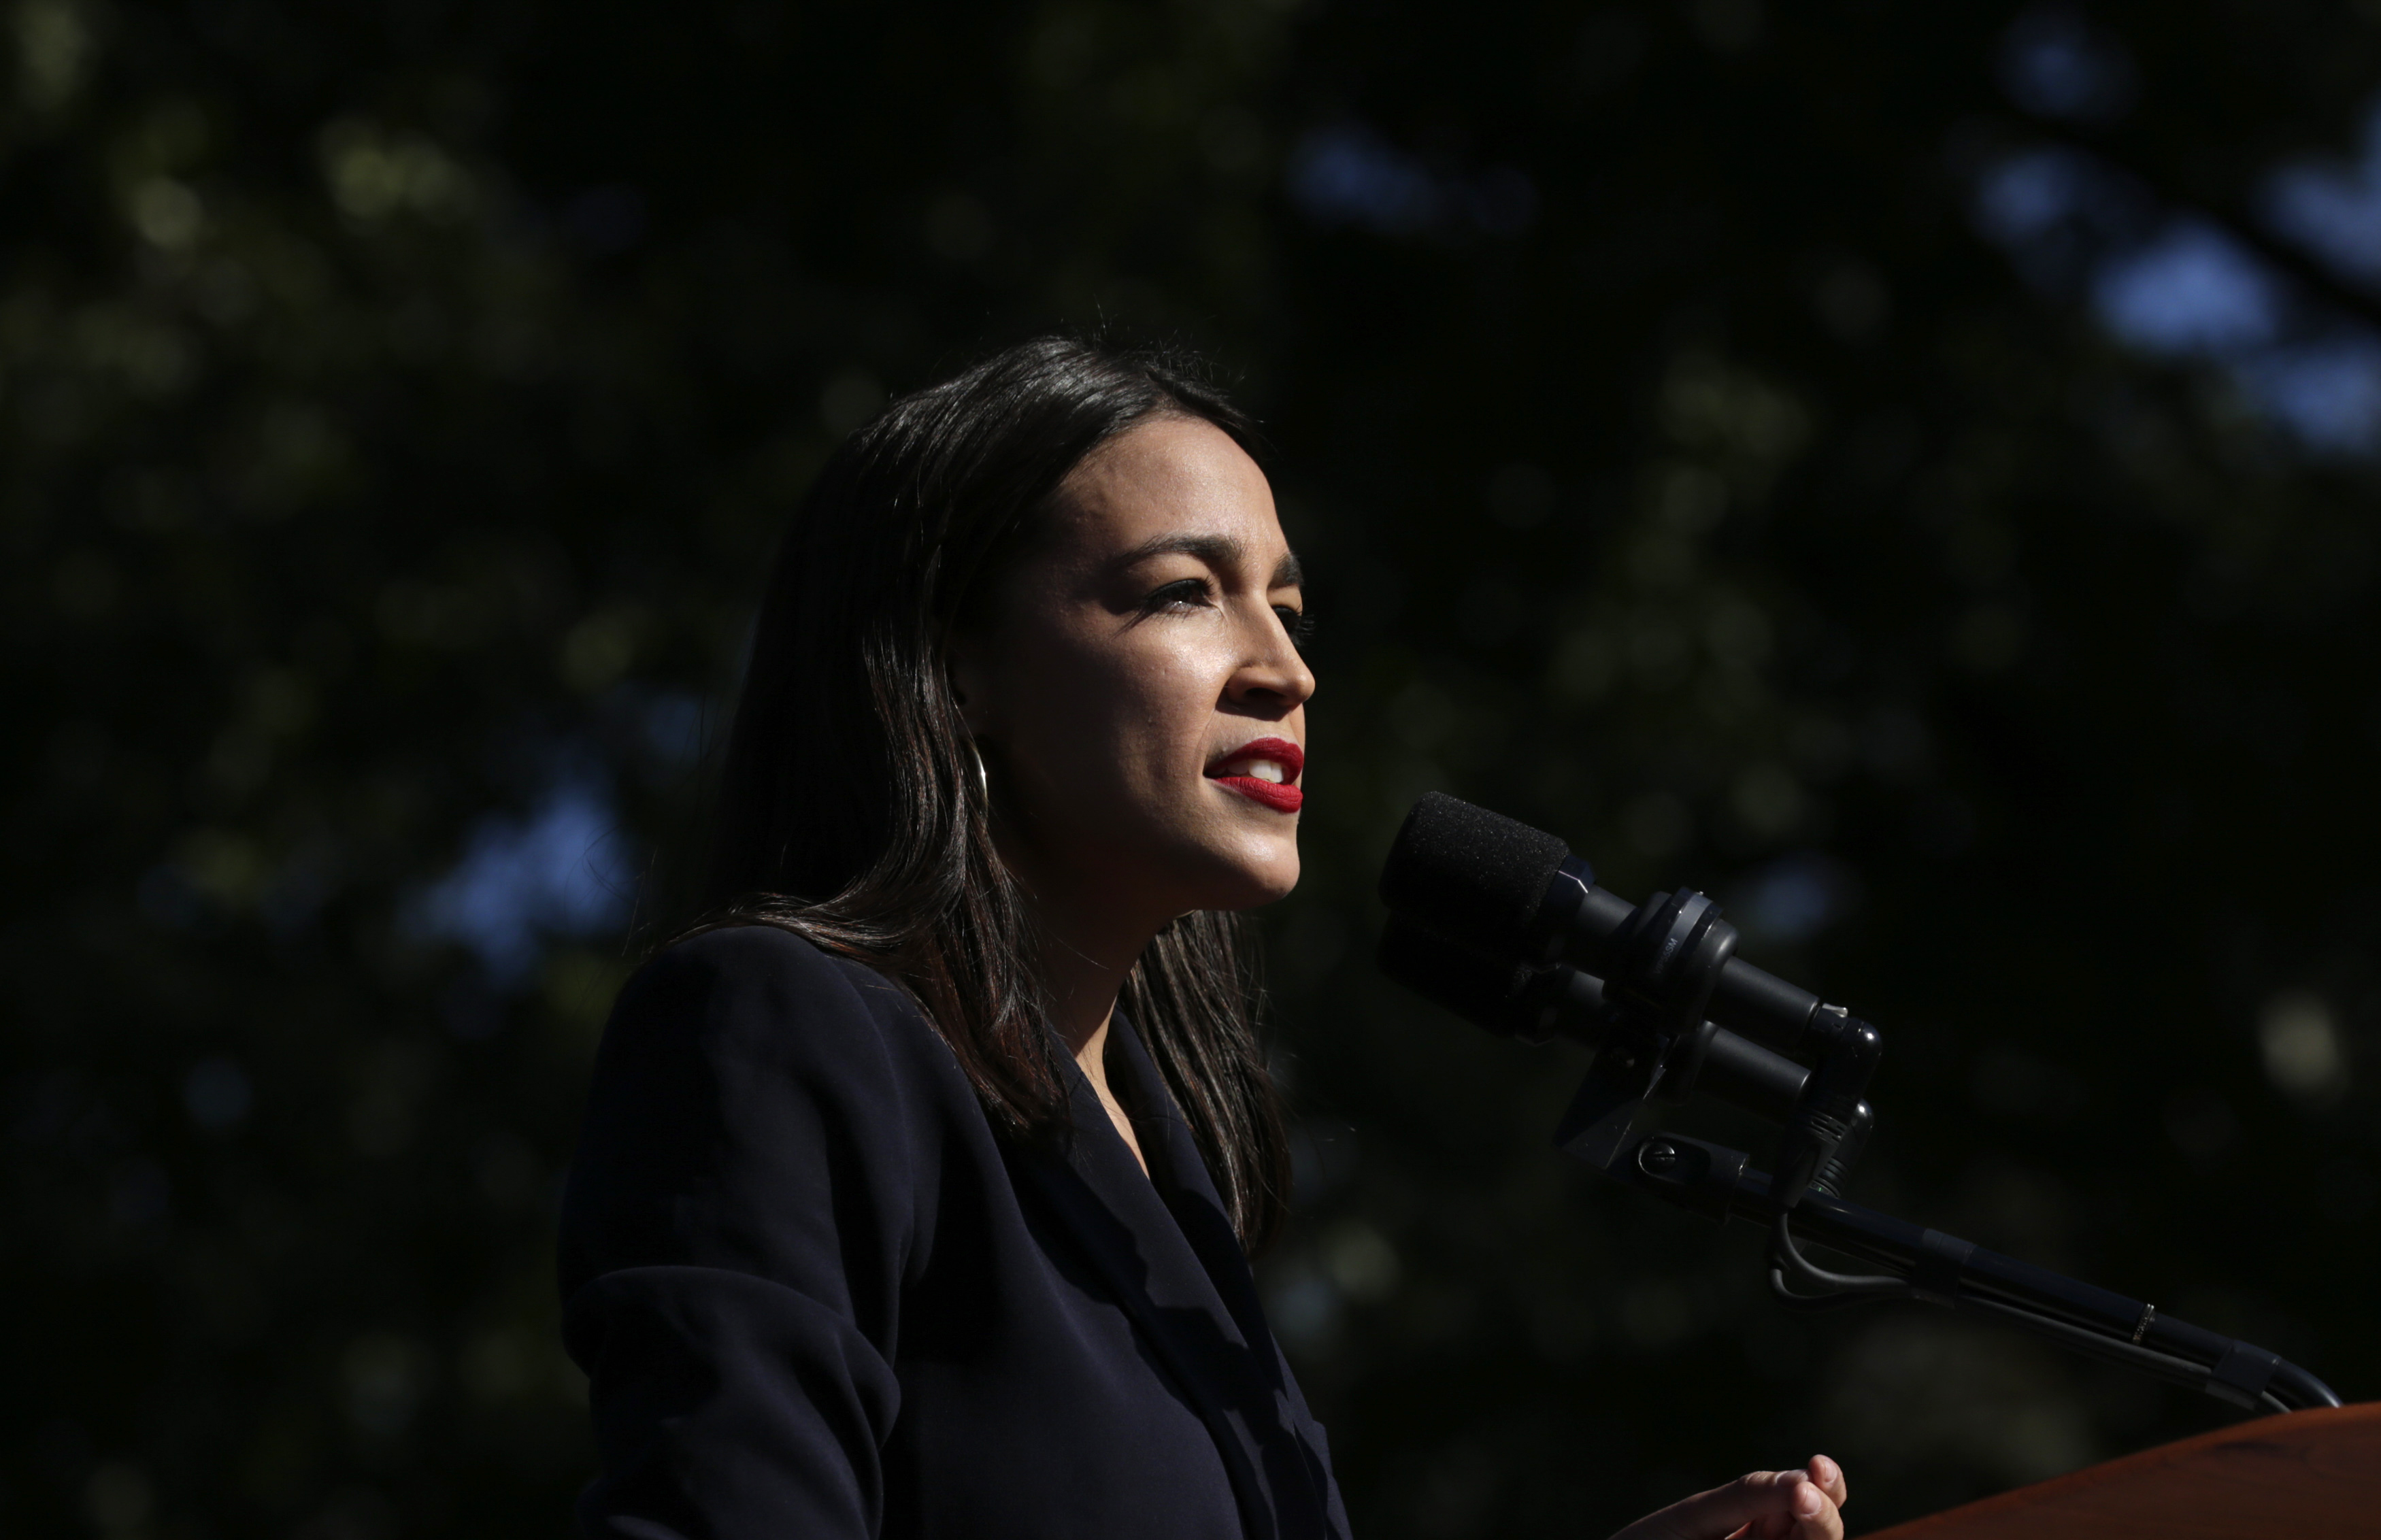 Aoc Fires Back At Lawmaker Disparaging Her Working Class Background The Gop Acts Like They Care